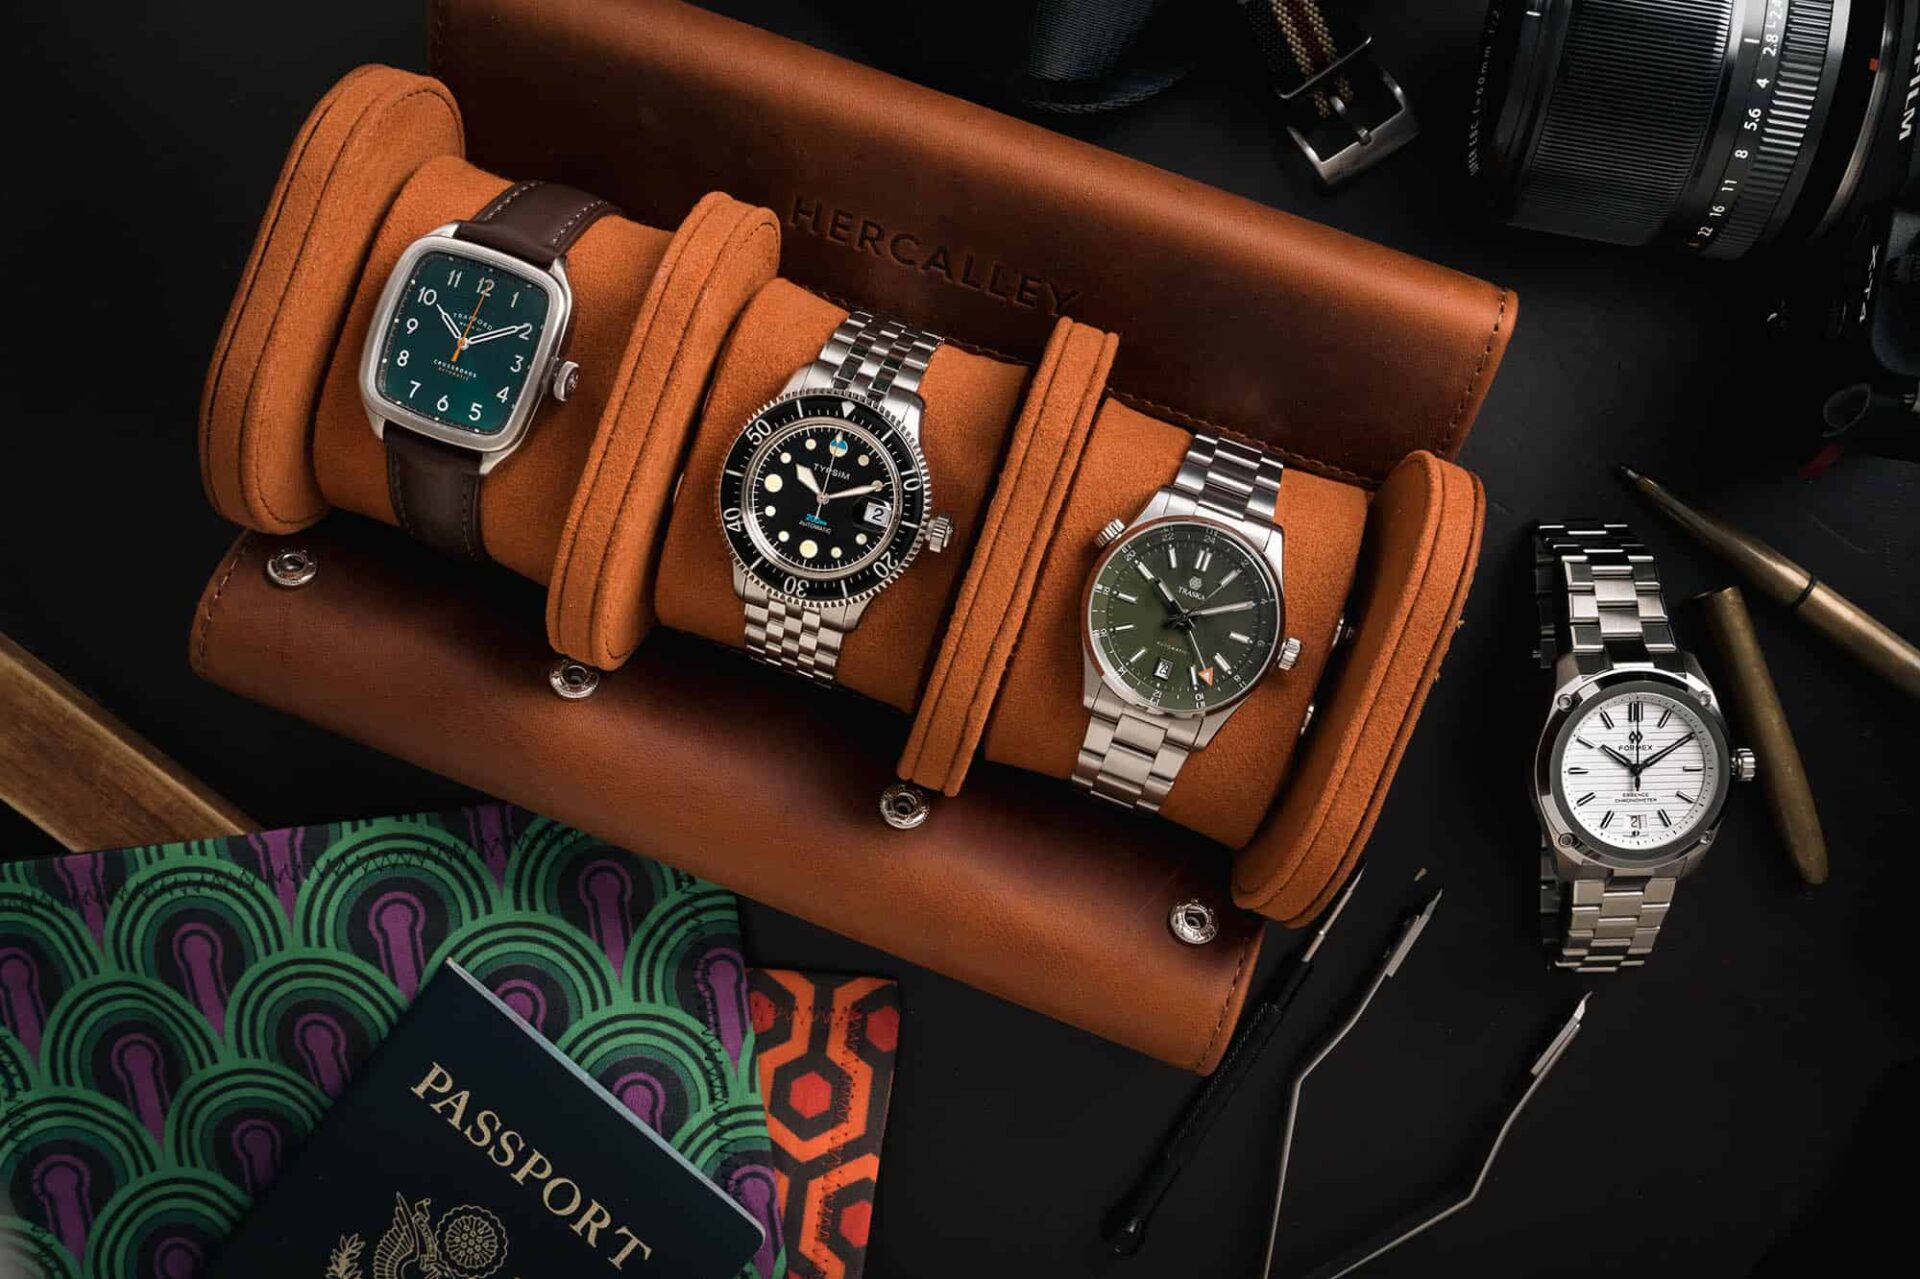 Cigar and Watch Accessories